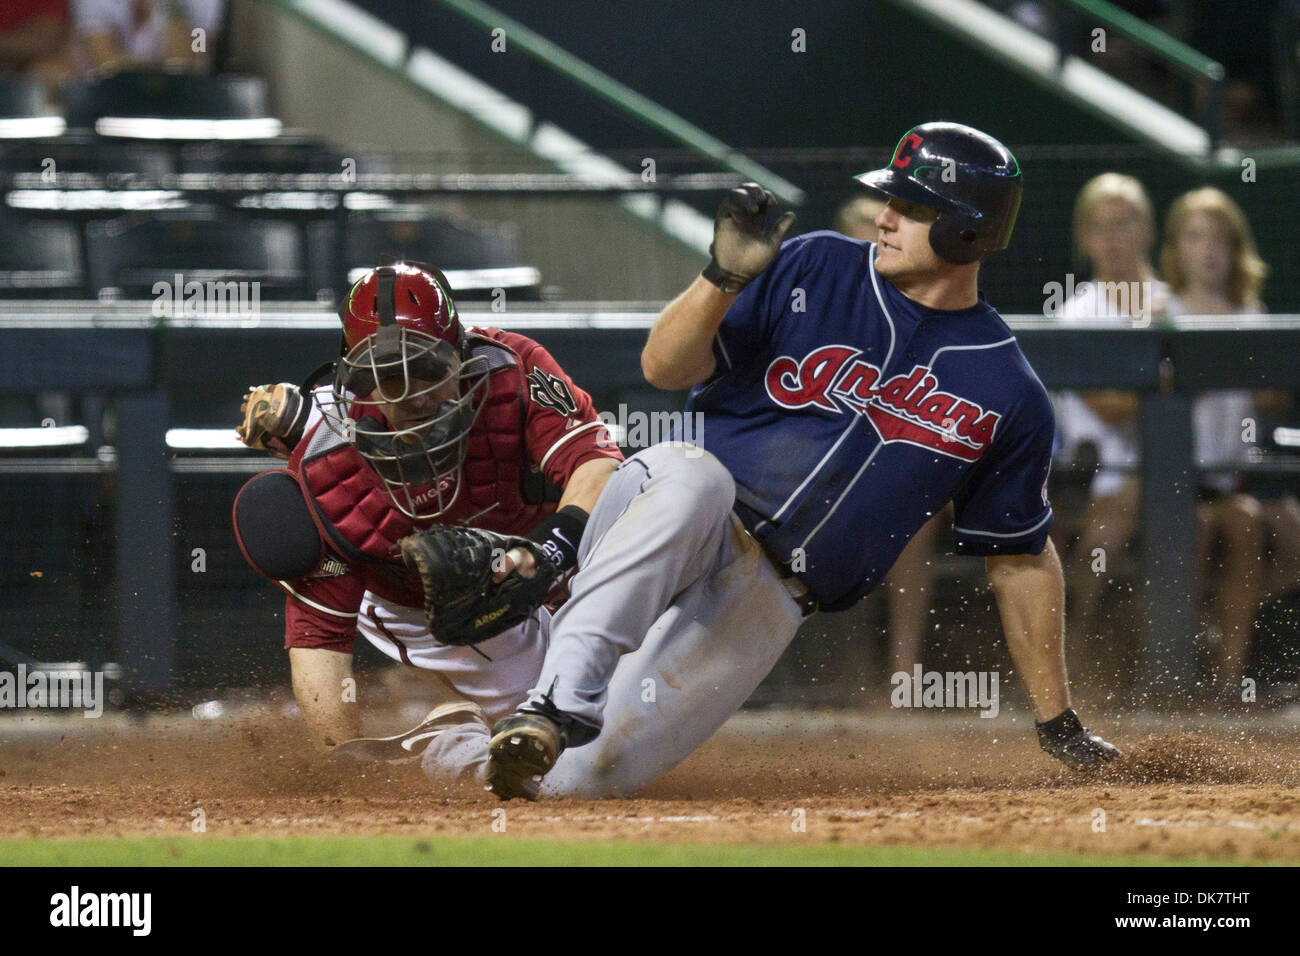 June 29, 2011 - Phoenix, Arizona, U.S - Cleveland Indians' catcher Lou Marson (6) slides into home ahead of the tag from Arizona Diamondbacks' catcher Miguel Montero (26) during the 9th inning. The Indians defeated the Diamondbacks 6-2 in the final game of a three game interleague series at Chase Field in Phoenix, Arizona. (Credit Image: © Chris Pondy/Southcreek Global/ZUMAPRESS.co Stock Photo